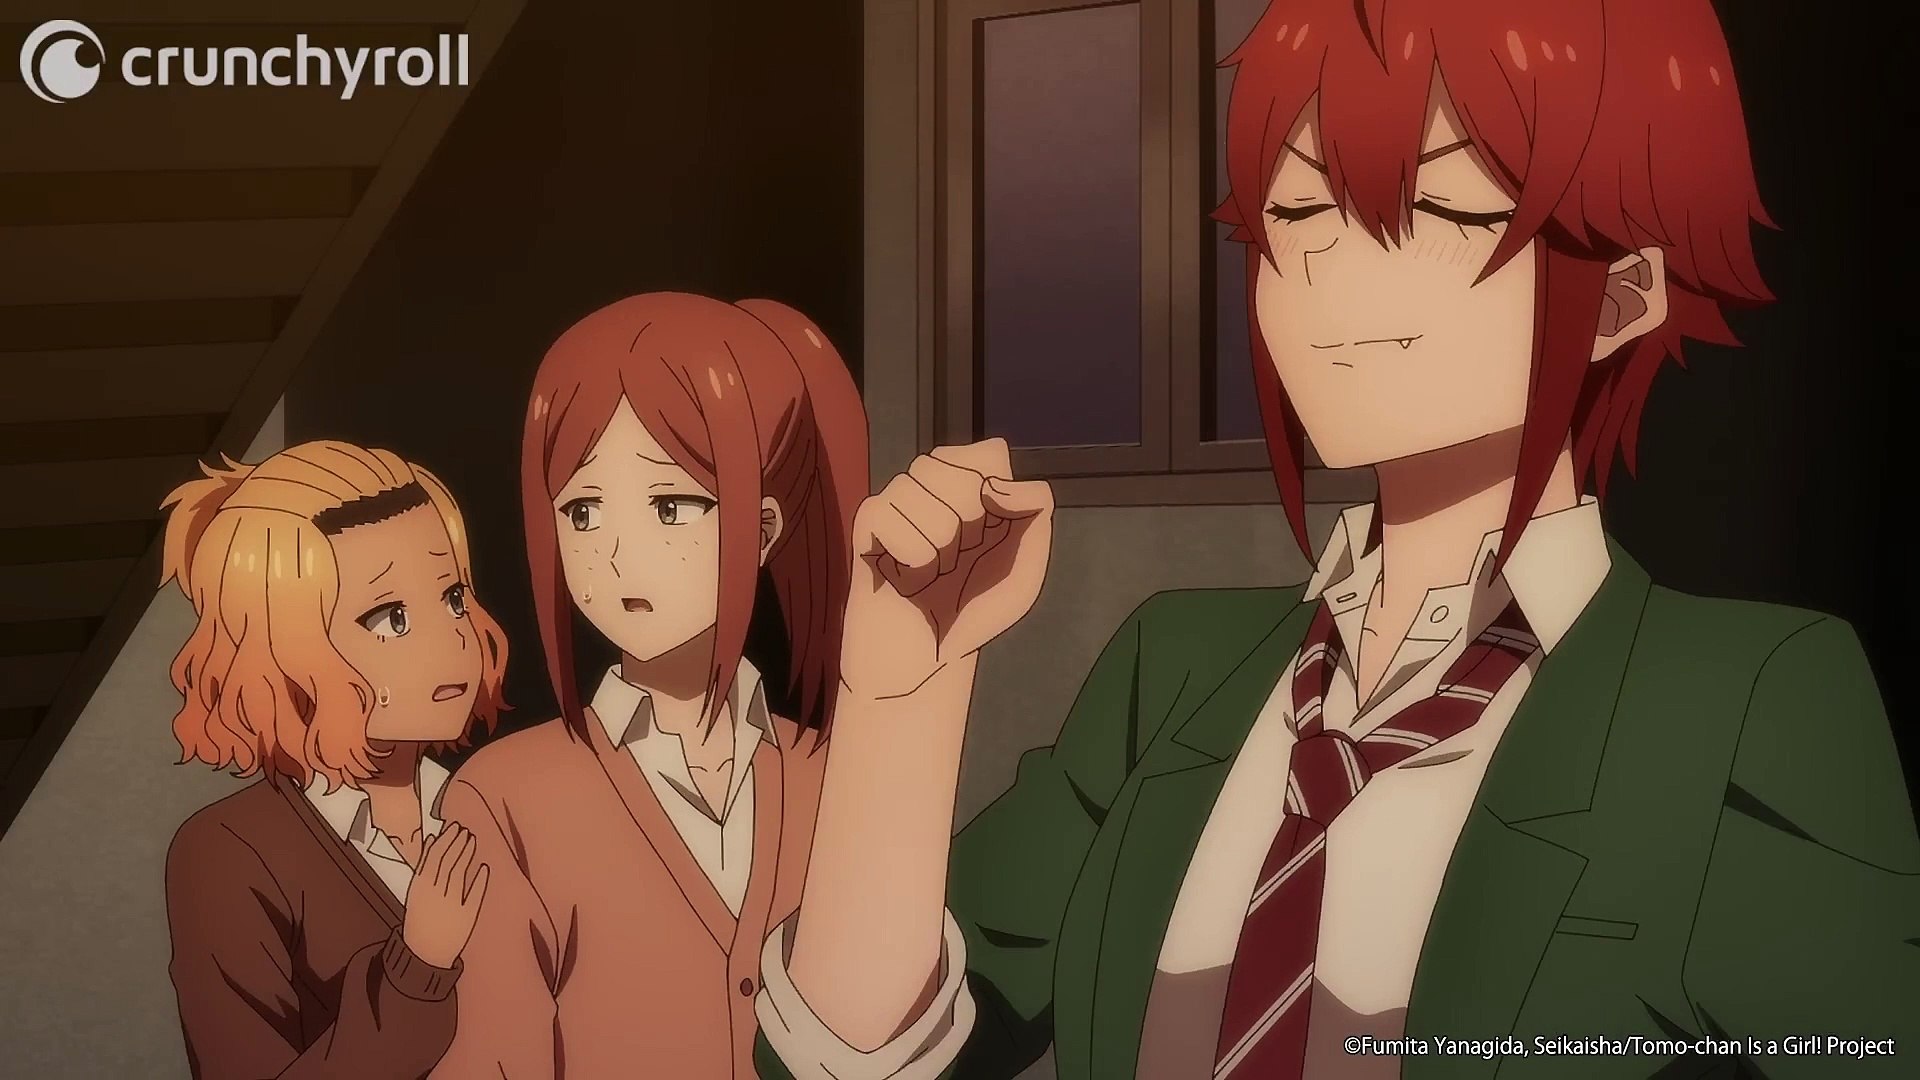 Tomo-chan Is a Girl! I Want to Be Seen as a Girl! - Watch on Crunchyroll